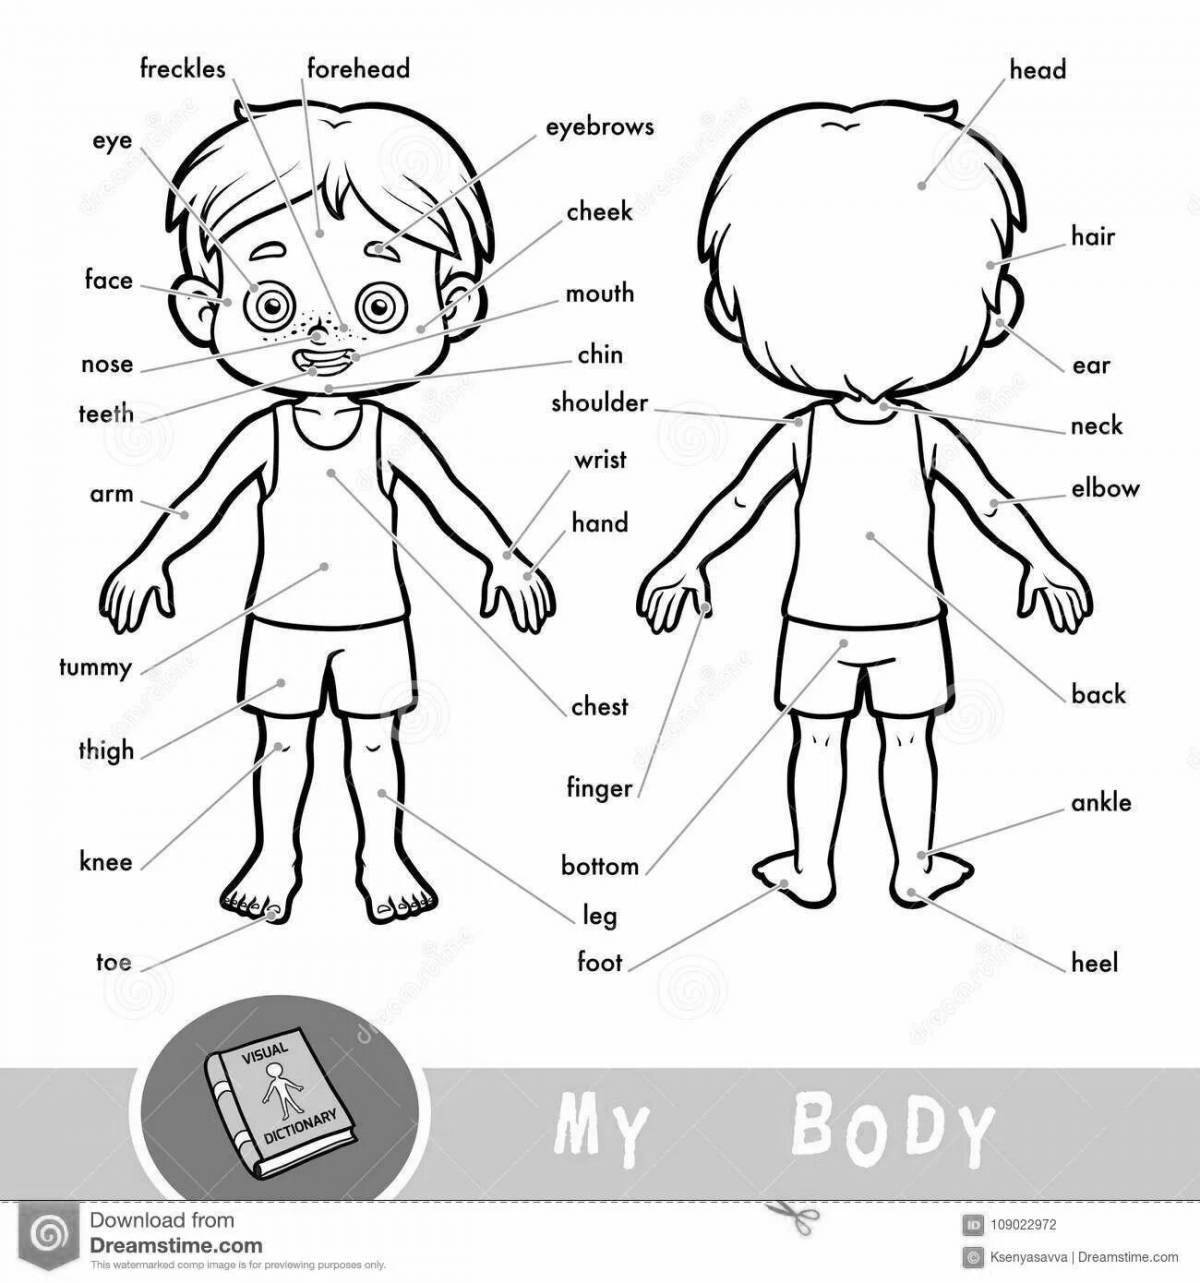 Coloring page of body parts